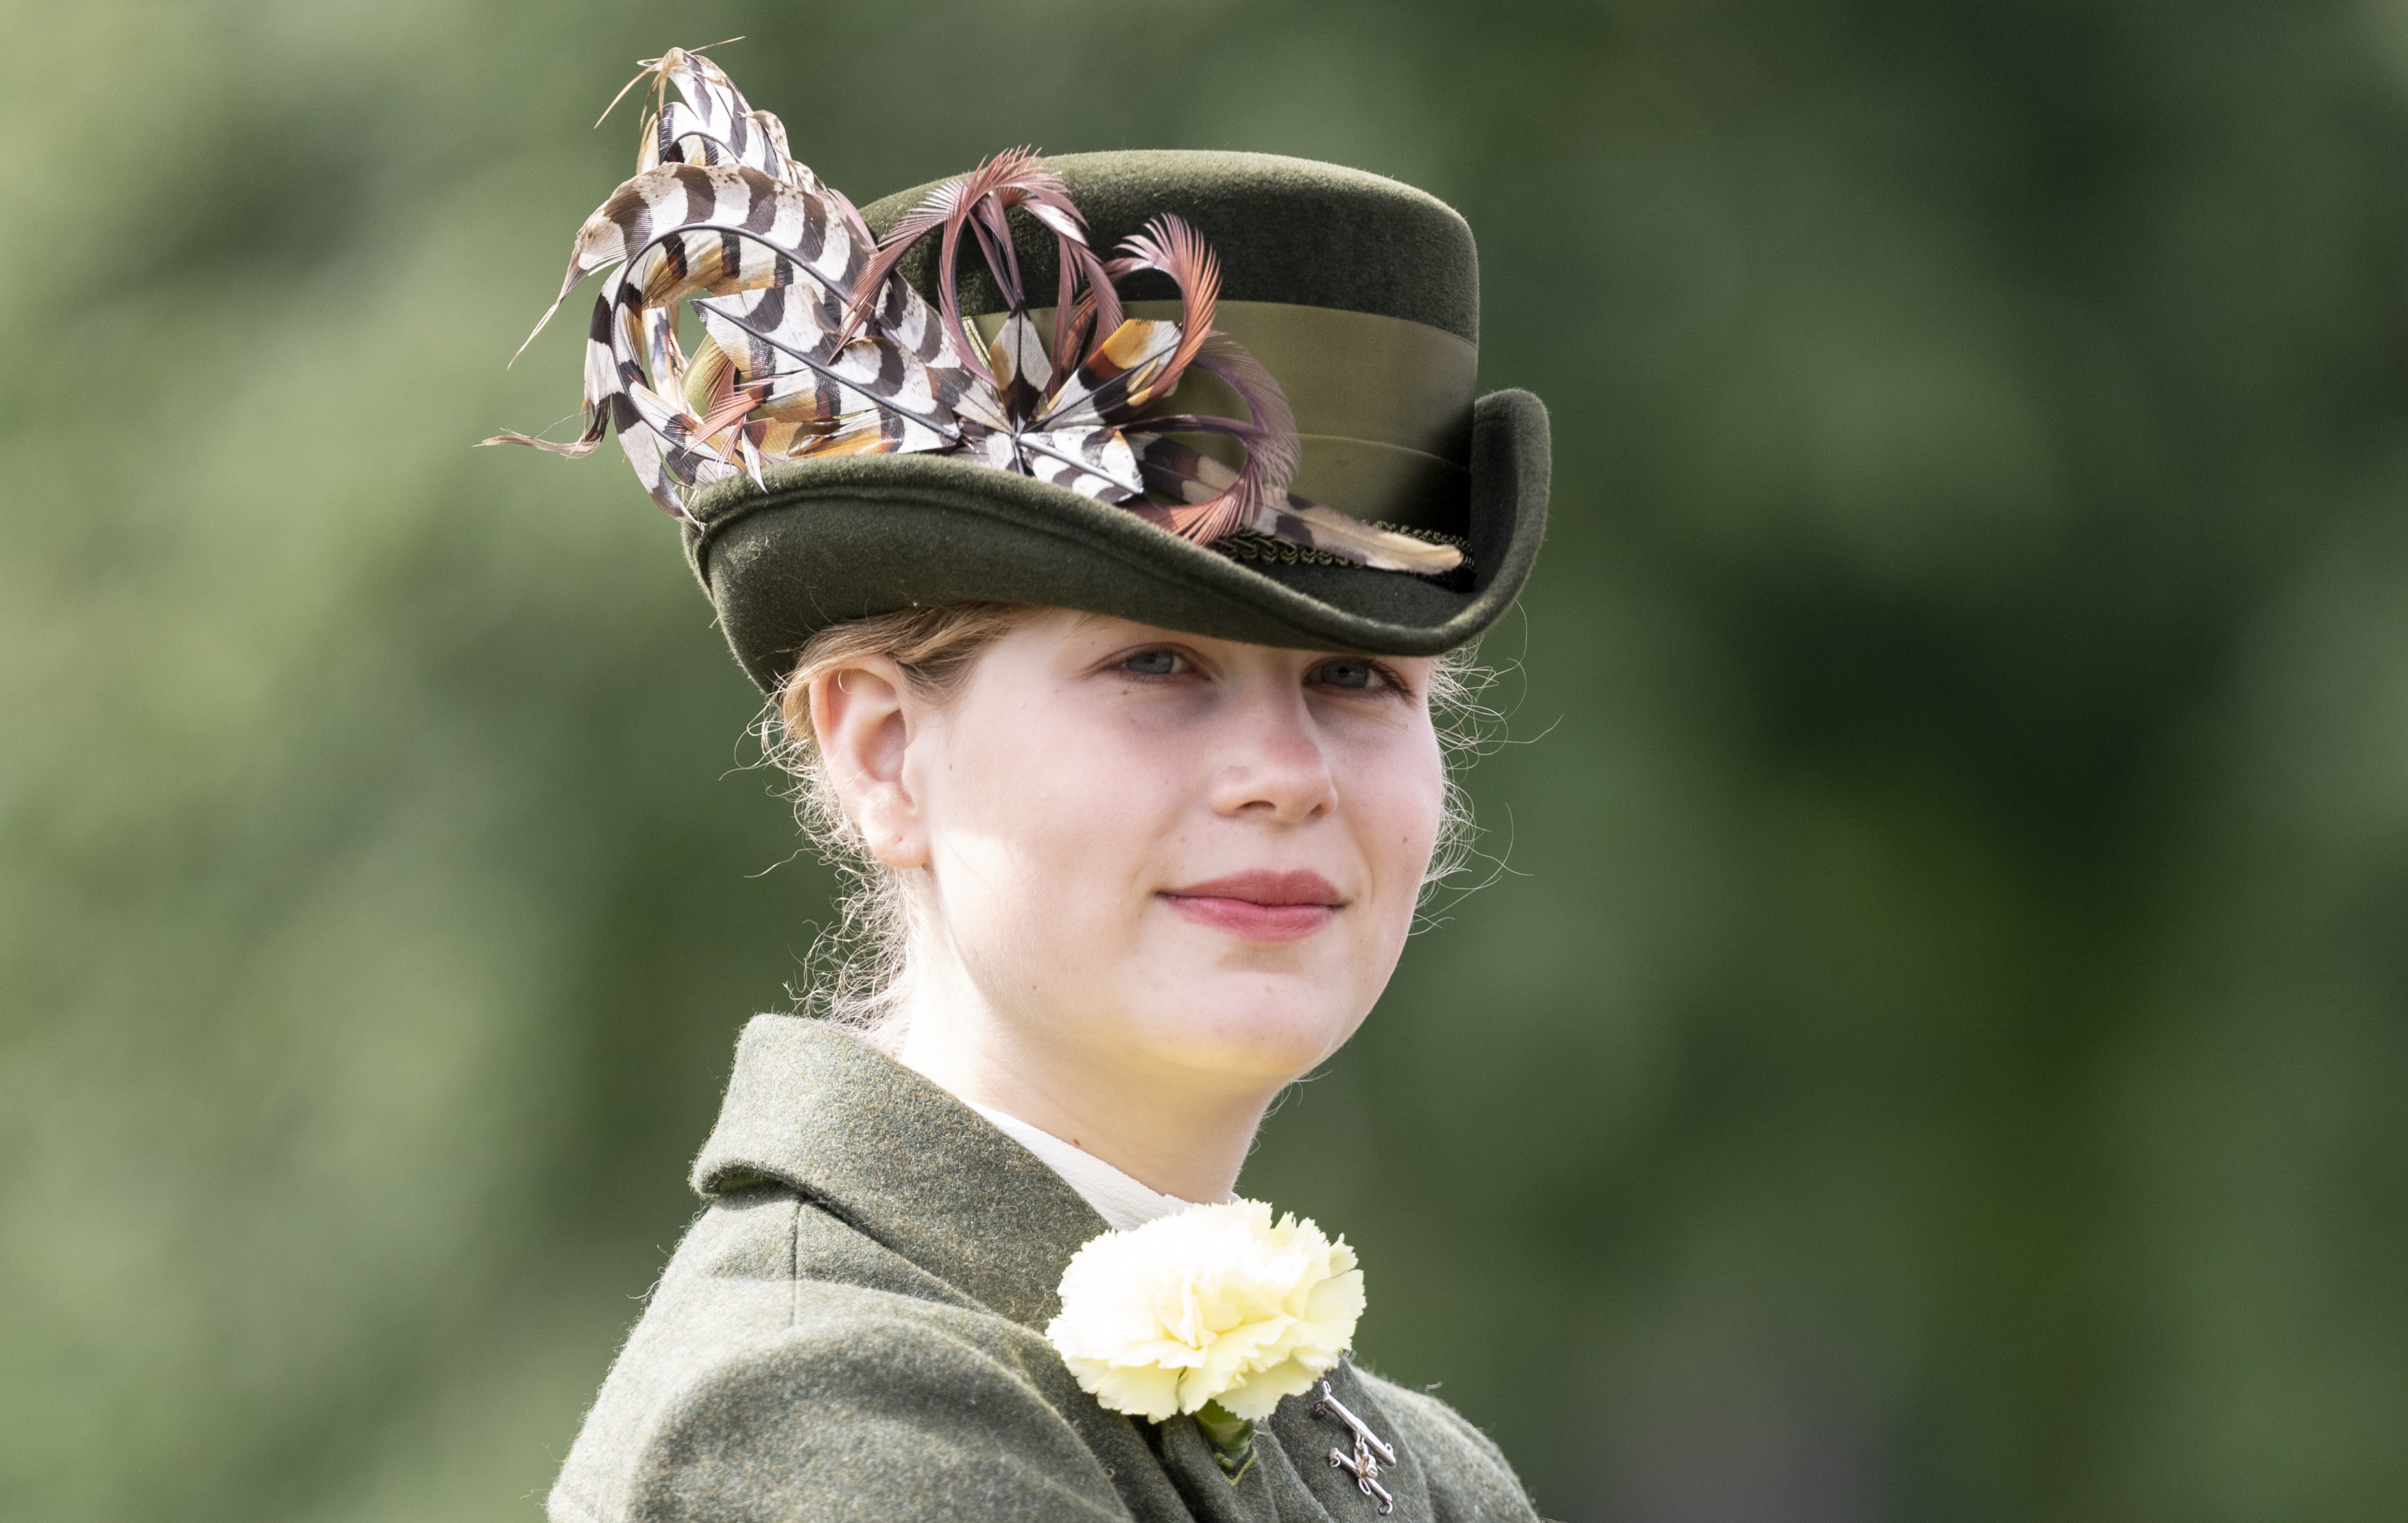 Lady Louise Windsor at the Royal Windsor Horse Show 2021 in Windsor Castle on July 4, 2021. | Source: Getty Images